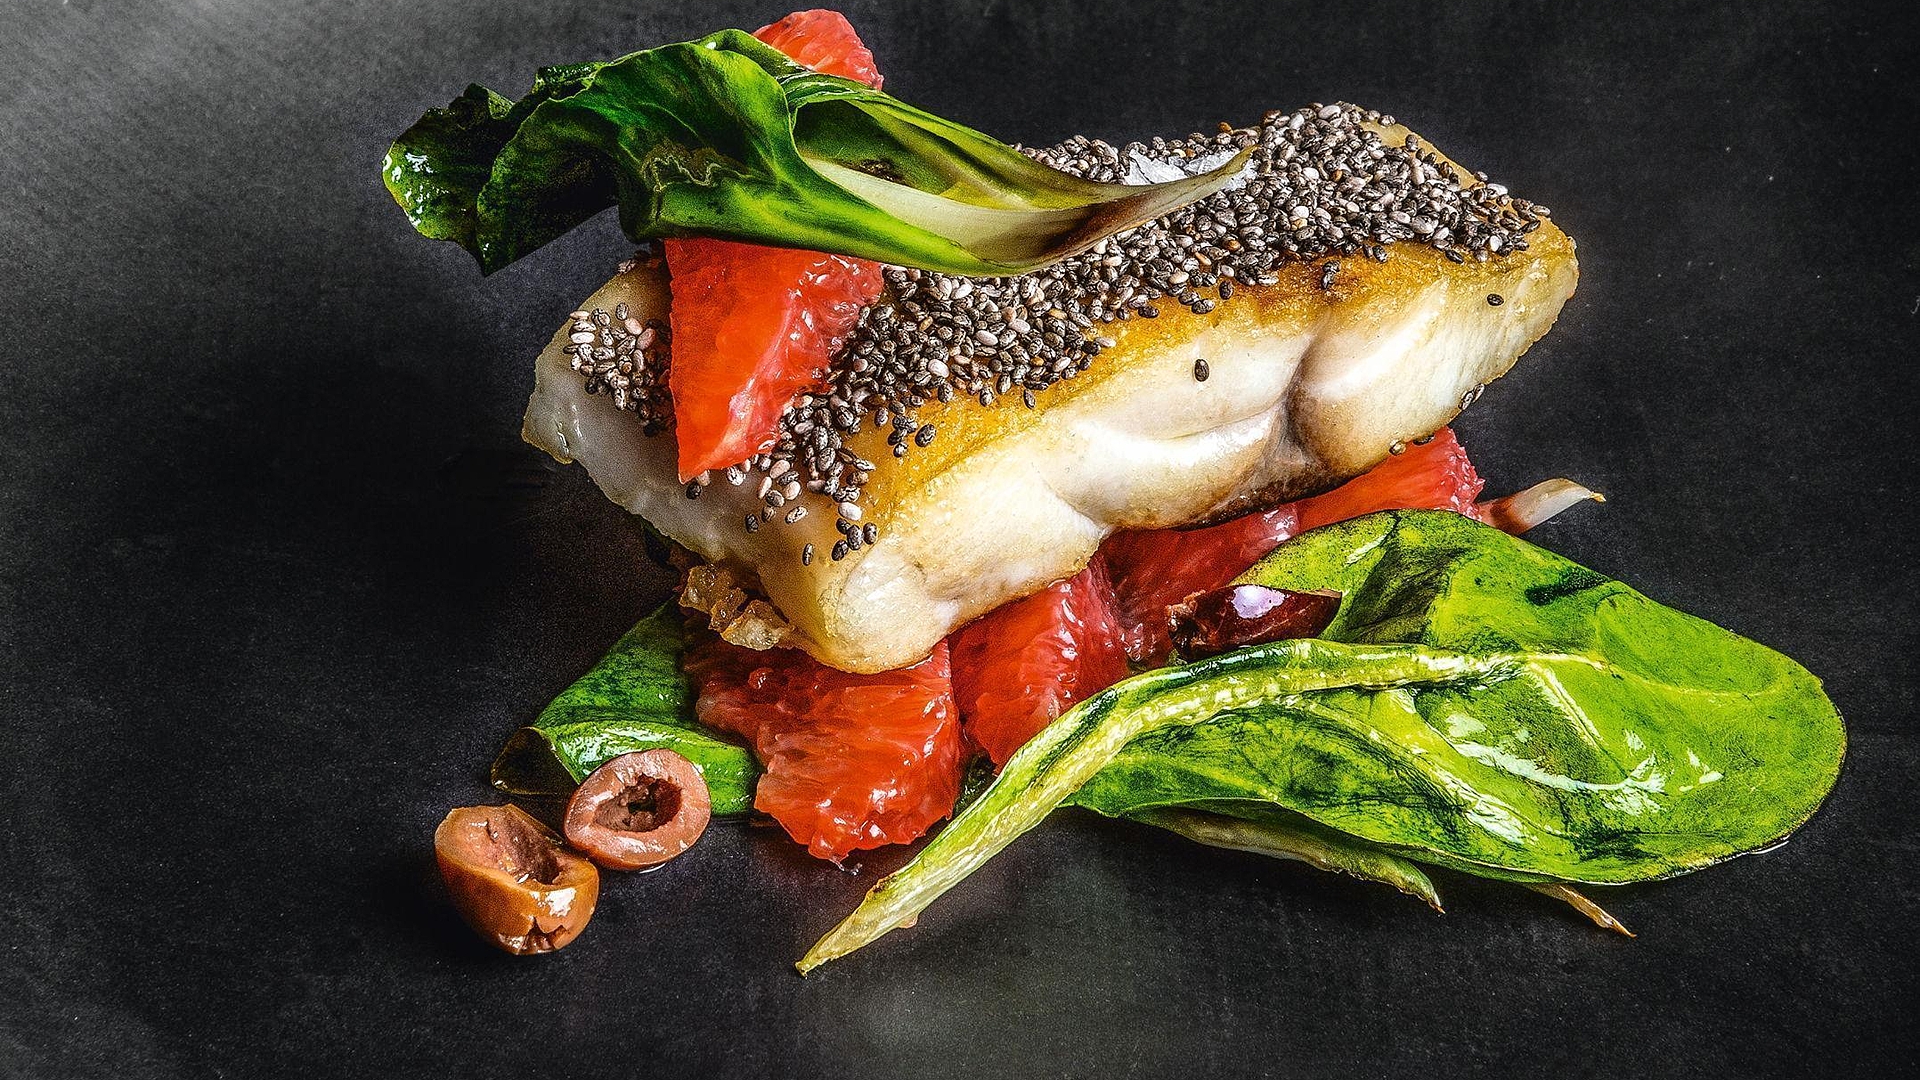 Hake in chia seed crust with pink grapefruit, taggiasca olives & chard